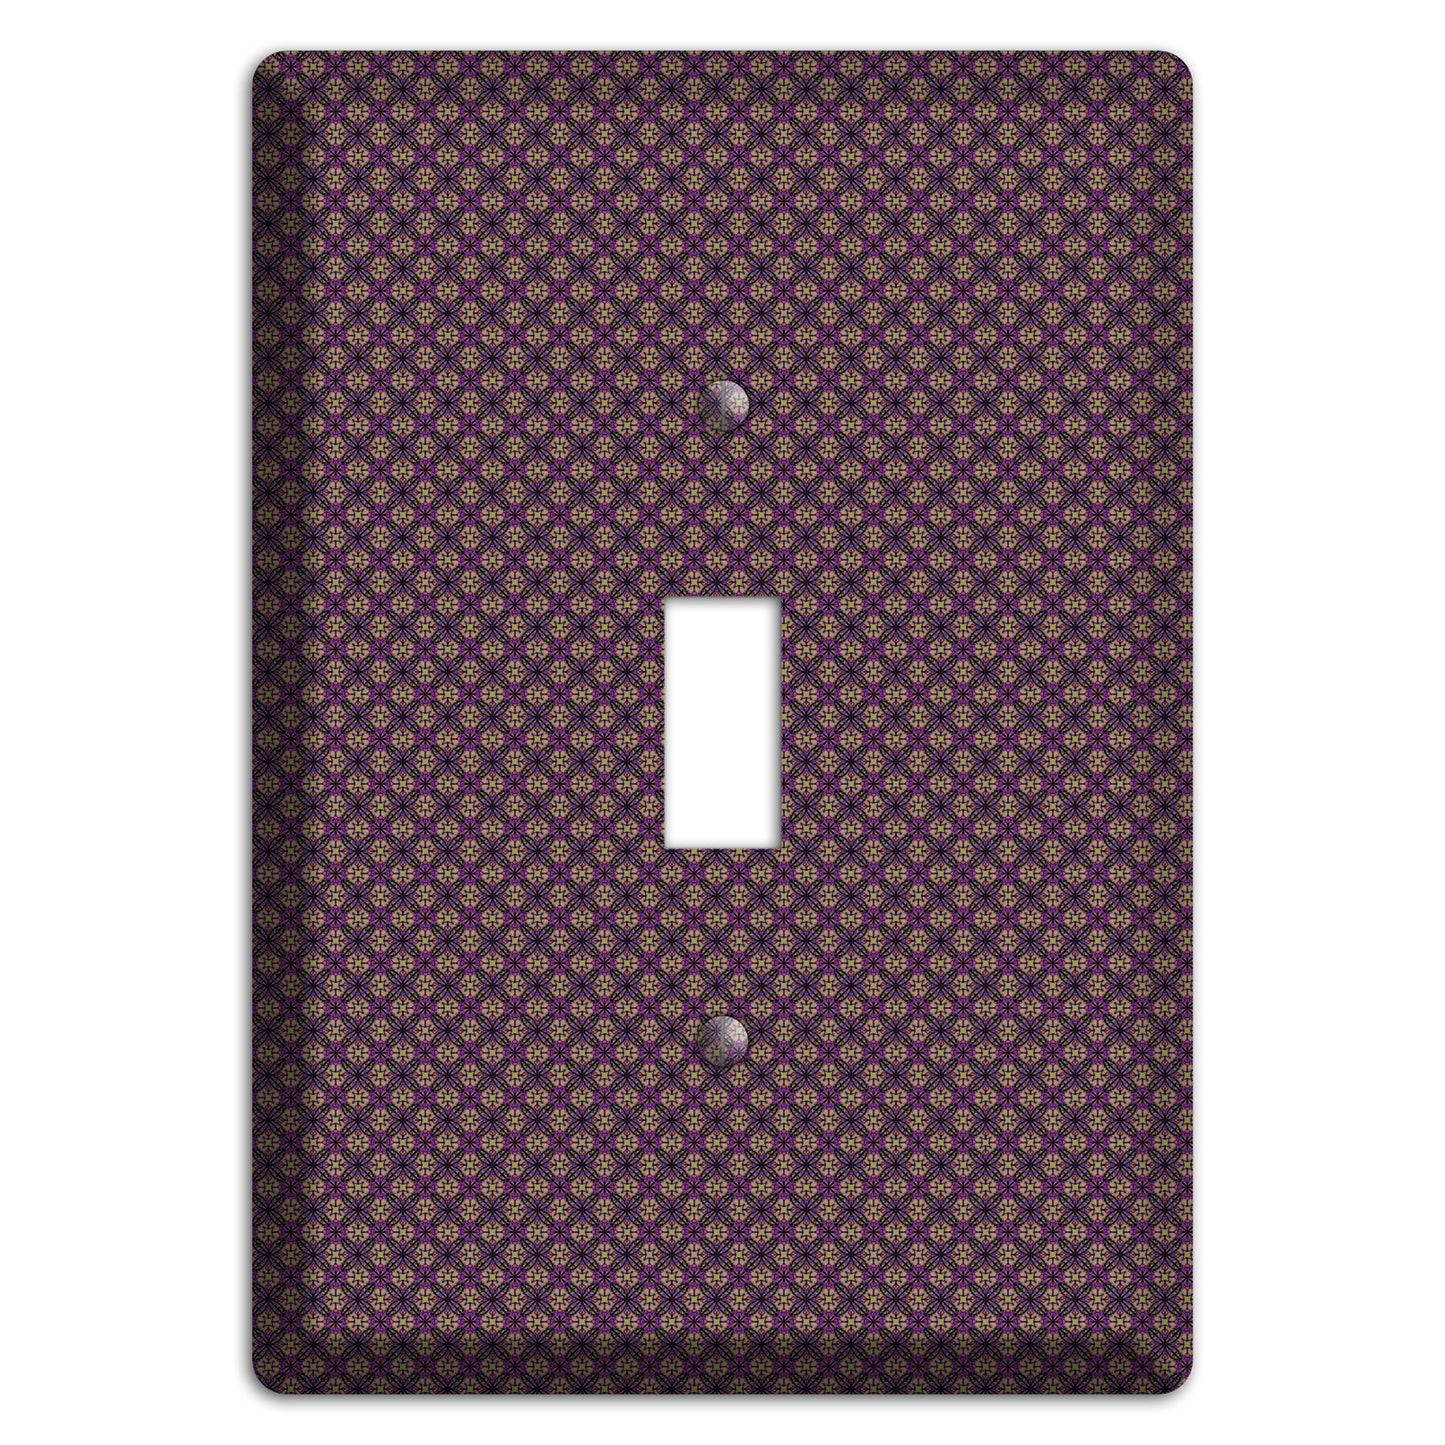 Brown and Purple Tiny Arabesque Cover Plates